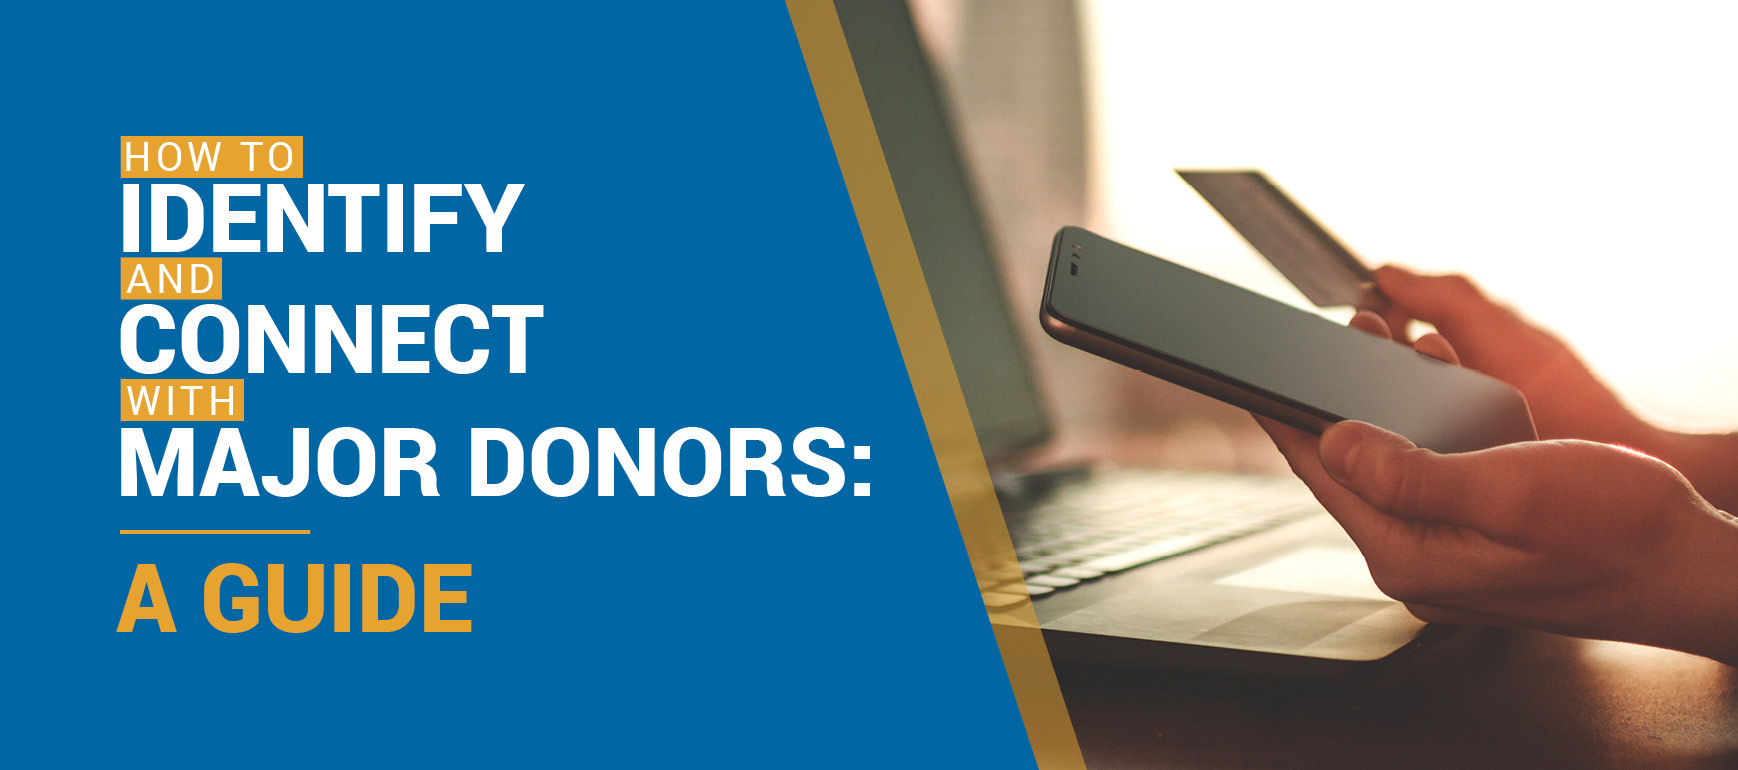 Major donors can give your organization the fundraising jolt it needs to reach new heights. 